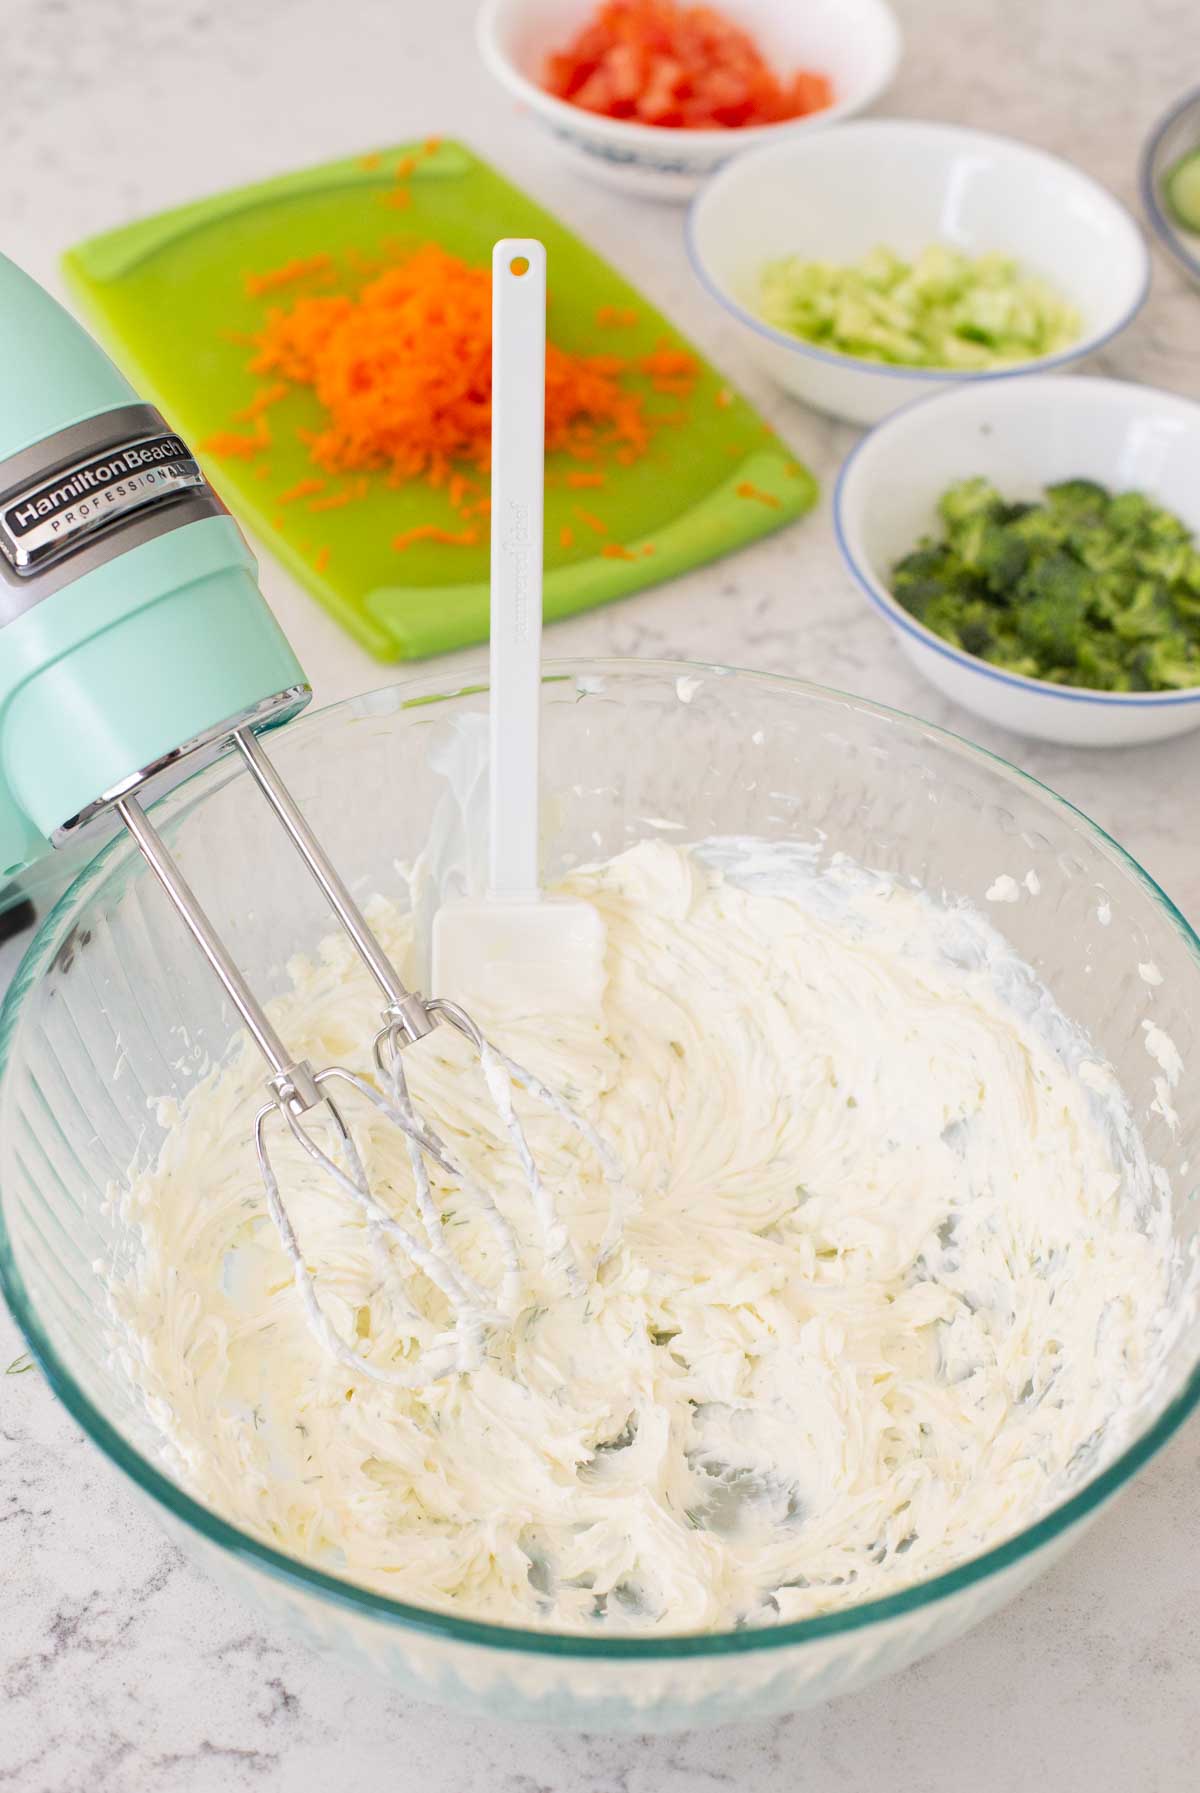 A mixing bowl has blended cream cheese with seasonings and prepped veggies are in the background.